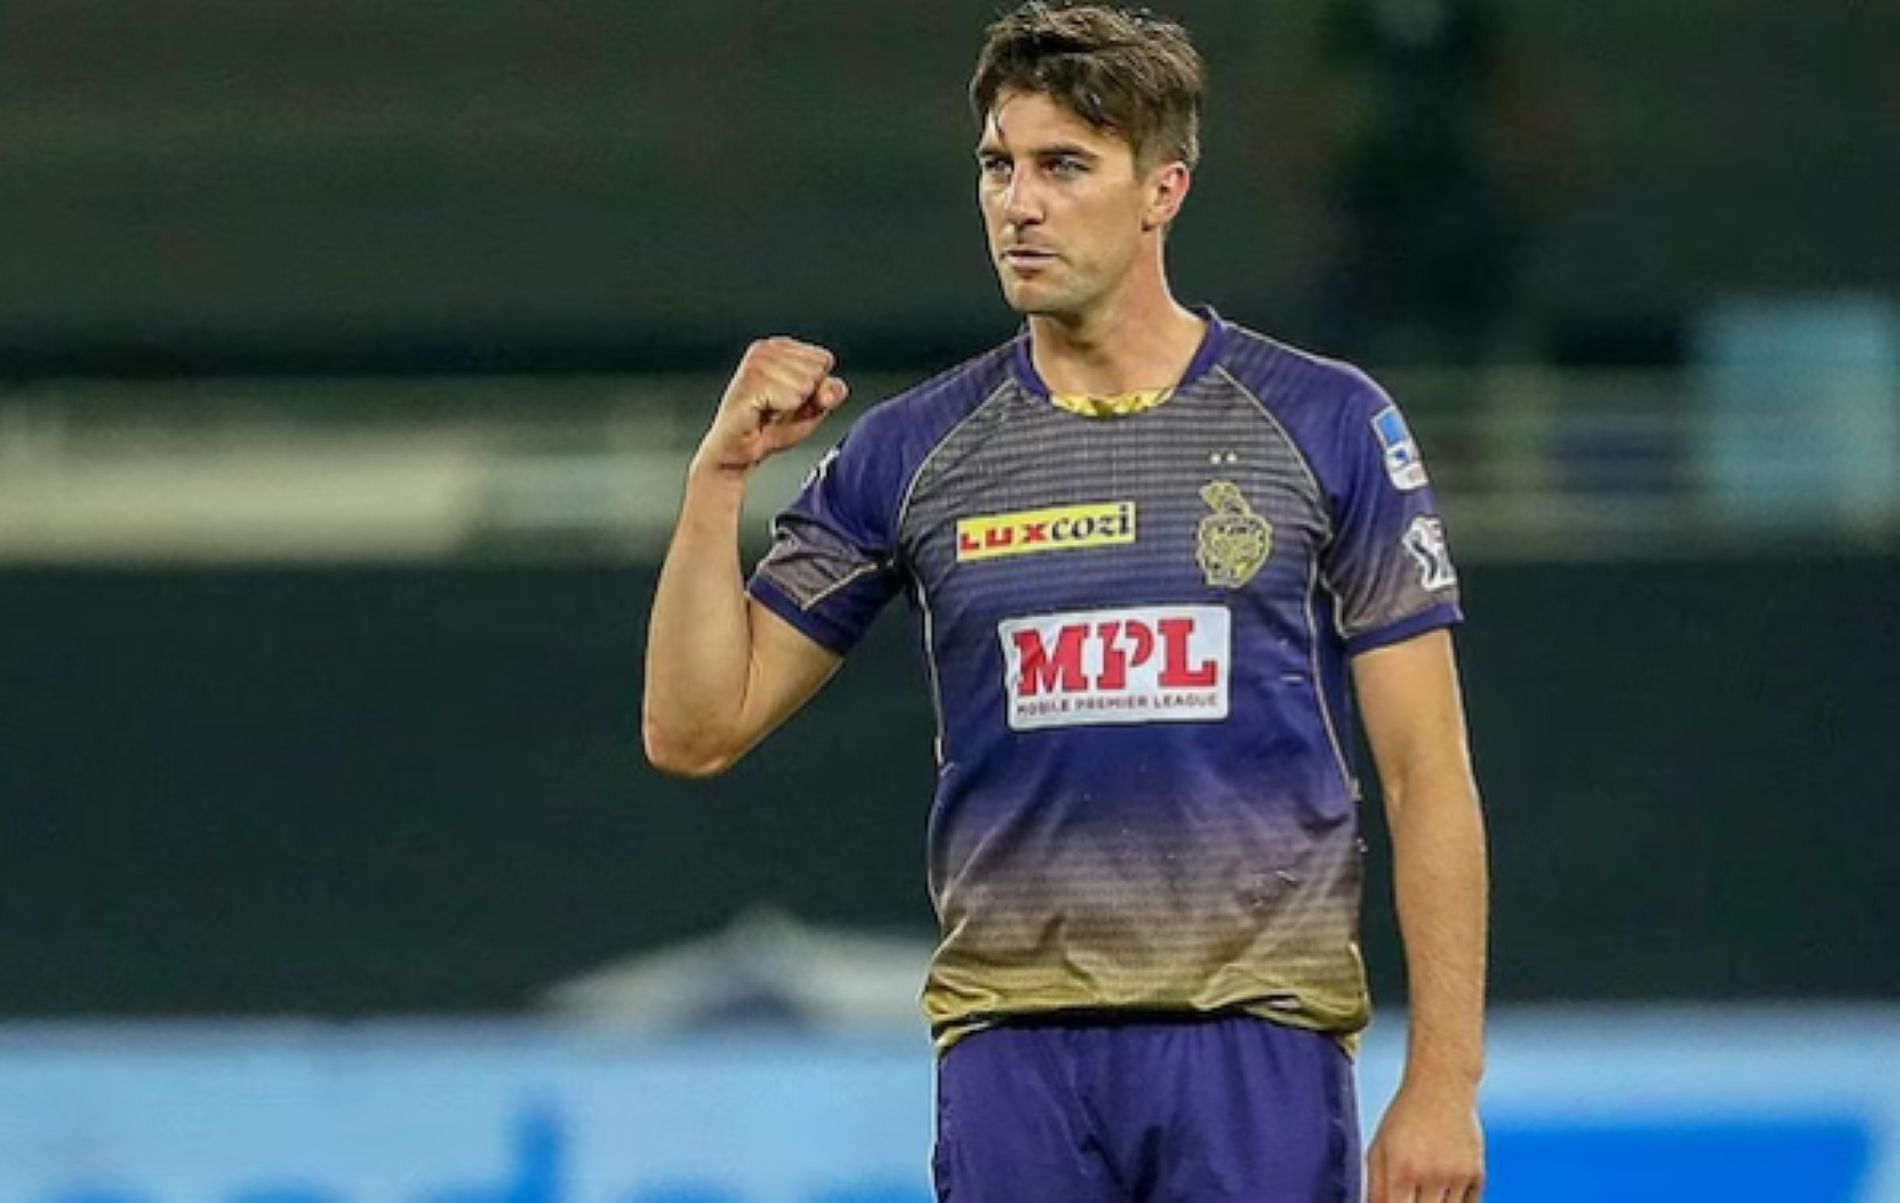 Cummins is back in the mix after missing the previous IPL season